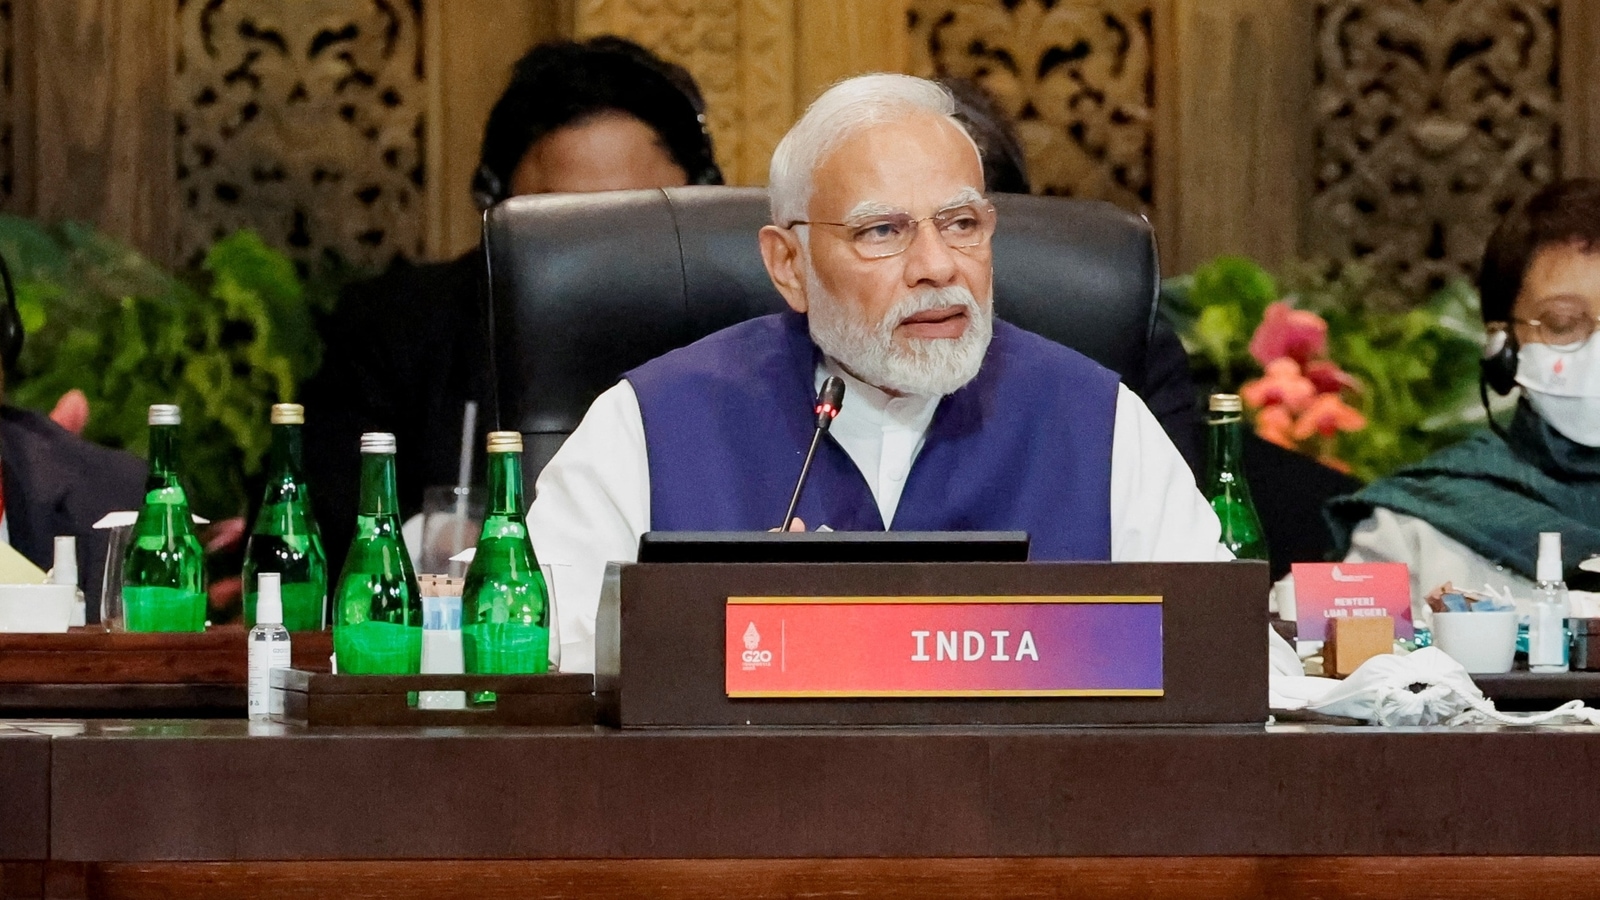 Are PM Modi's image on the gift bags provided at the FIFA World Cup 2022  opening ceremony in Qatar? - Fact Crescendo